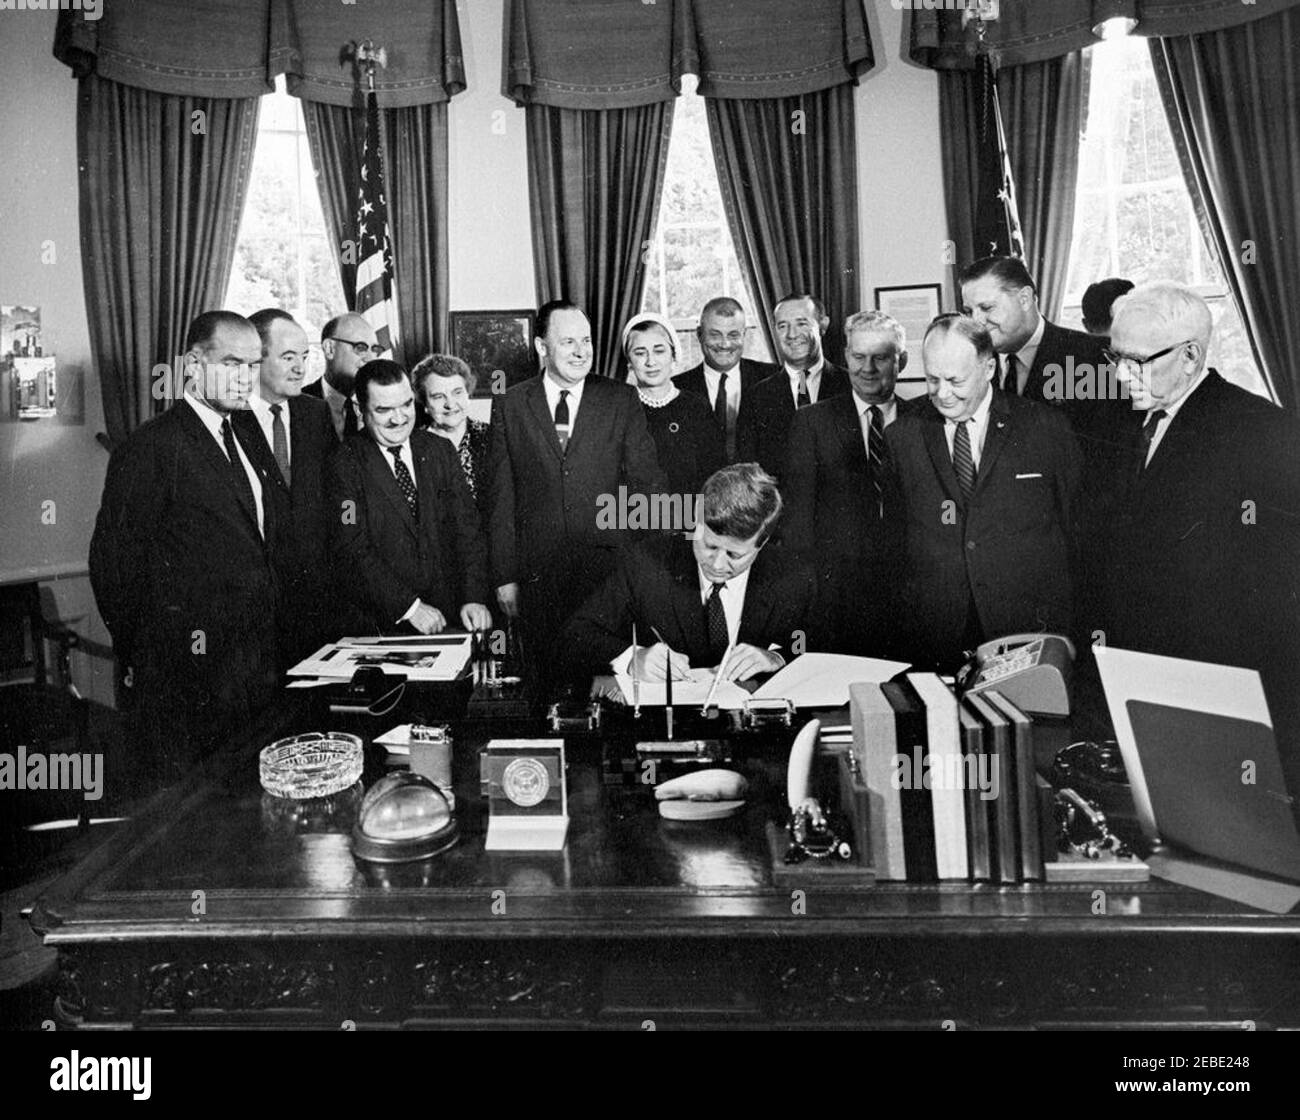 Bill signing - H.R. 8666 Public Law 87-256, Fulbright-Hays Act, 5:15PM. President John F. Kennedy signs the Mutual Educational and Cultural Exchange Act (Fulbright-Hays Act) in the Oval Office, White House, Washington, D.C. (L-R) Senator J. William Fulbright of Arkansas; Senator Hubert Humphrey of Minnesota; Representative E. Ross Adair of Indiana; Representative Clement Zablocki of Wisconsin; Representative Frances Bolton of Ohio; Representative Wayne Hays of Ohio; Representative Edna Kelly of New York; Representative Horace Seely-Brown of Connecticut; Representative John Monagan of Connectic Stock Photo